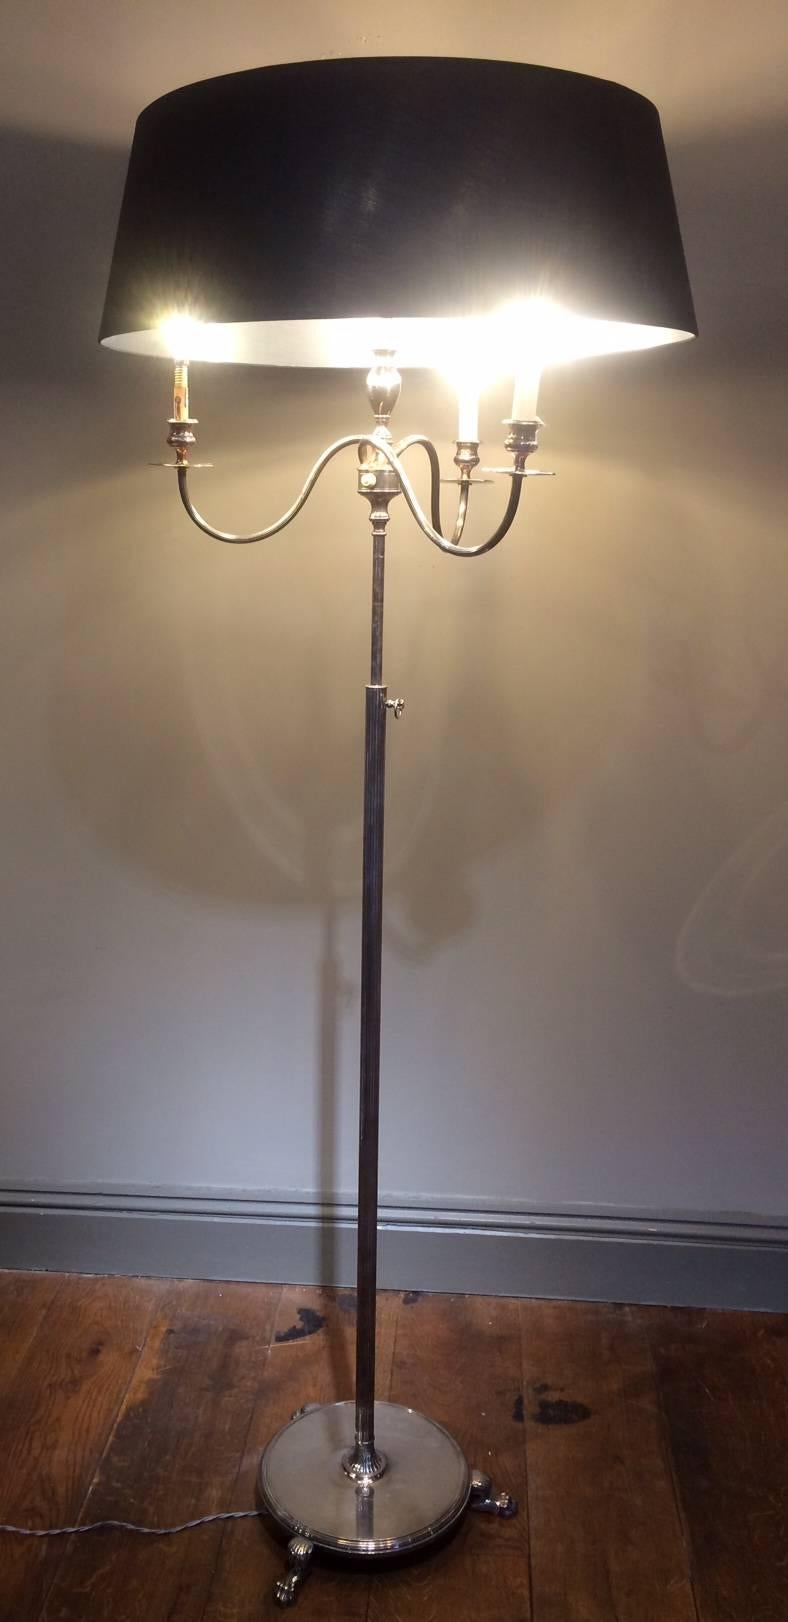 A stunning neoclassical Maison Jansen silver floor lamp. Beautiful detail in the rotating arms and brushed silver work. Five bulbs that each rotate and adjust providing a splendid light strength. Silver bass with claw feet provide an extra detail. A